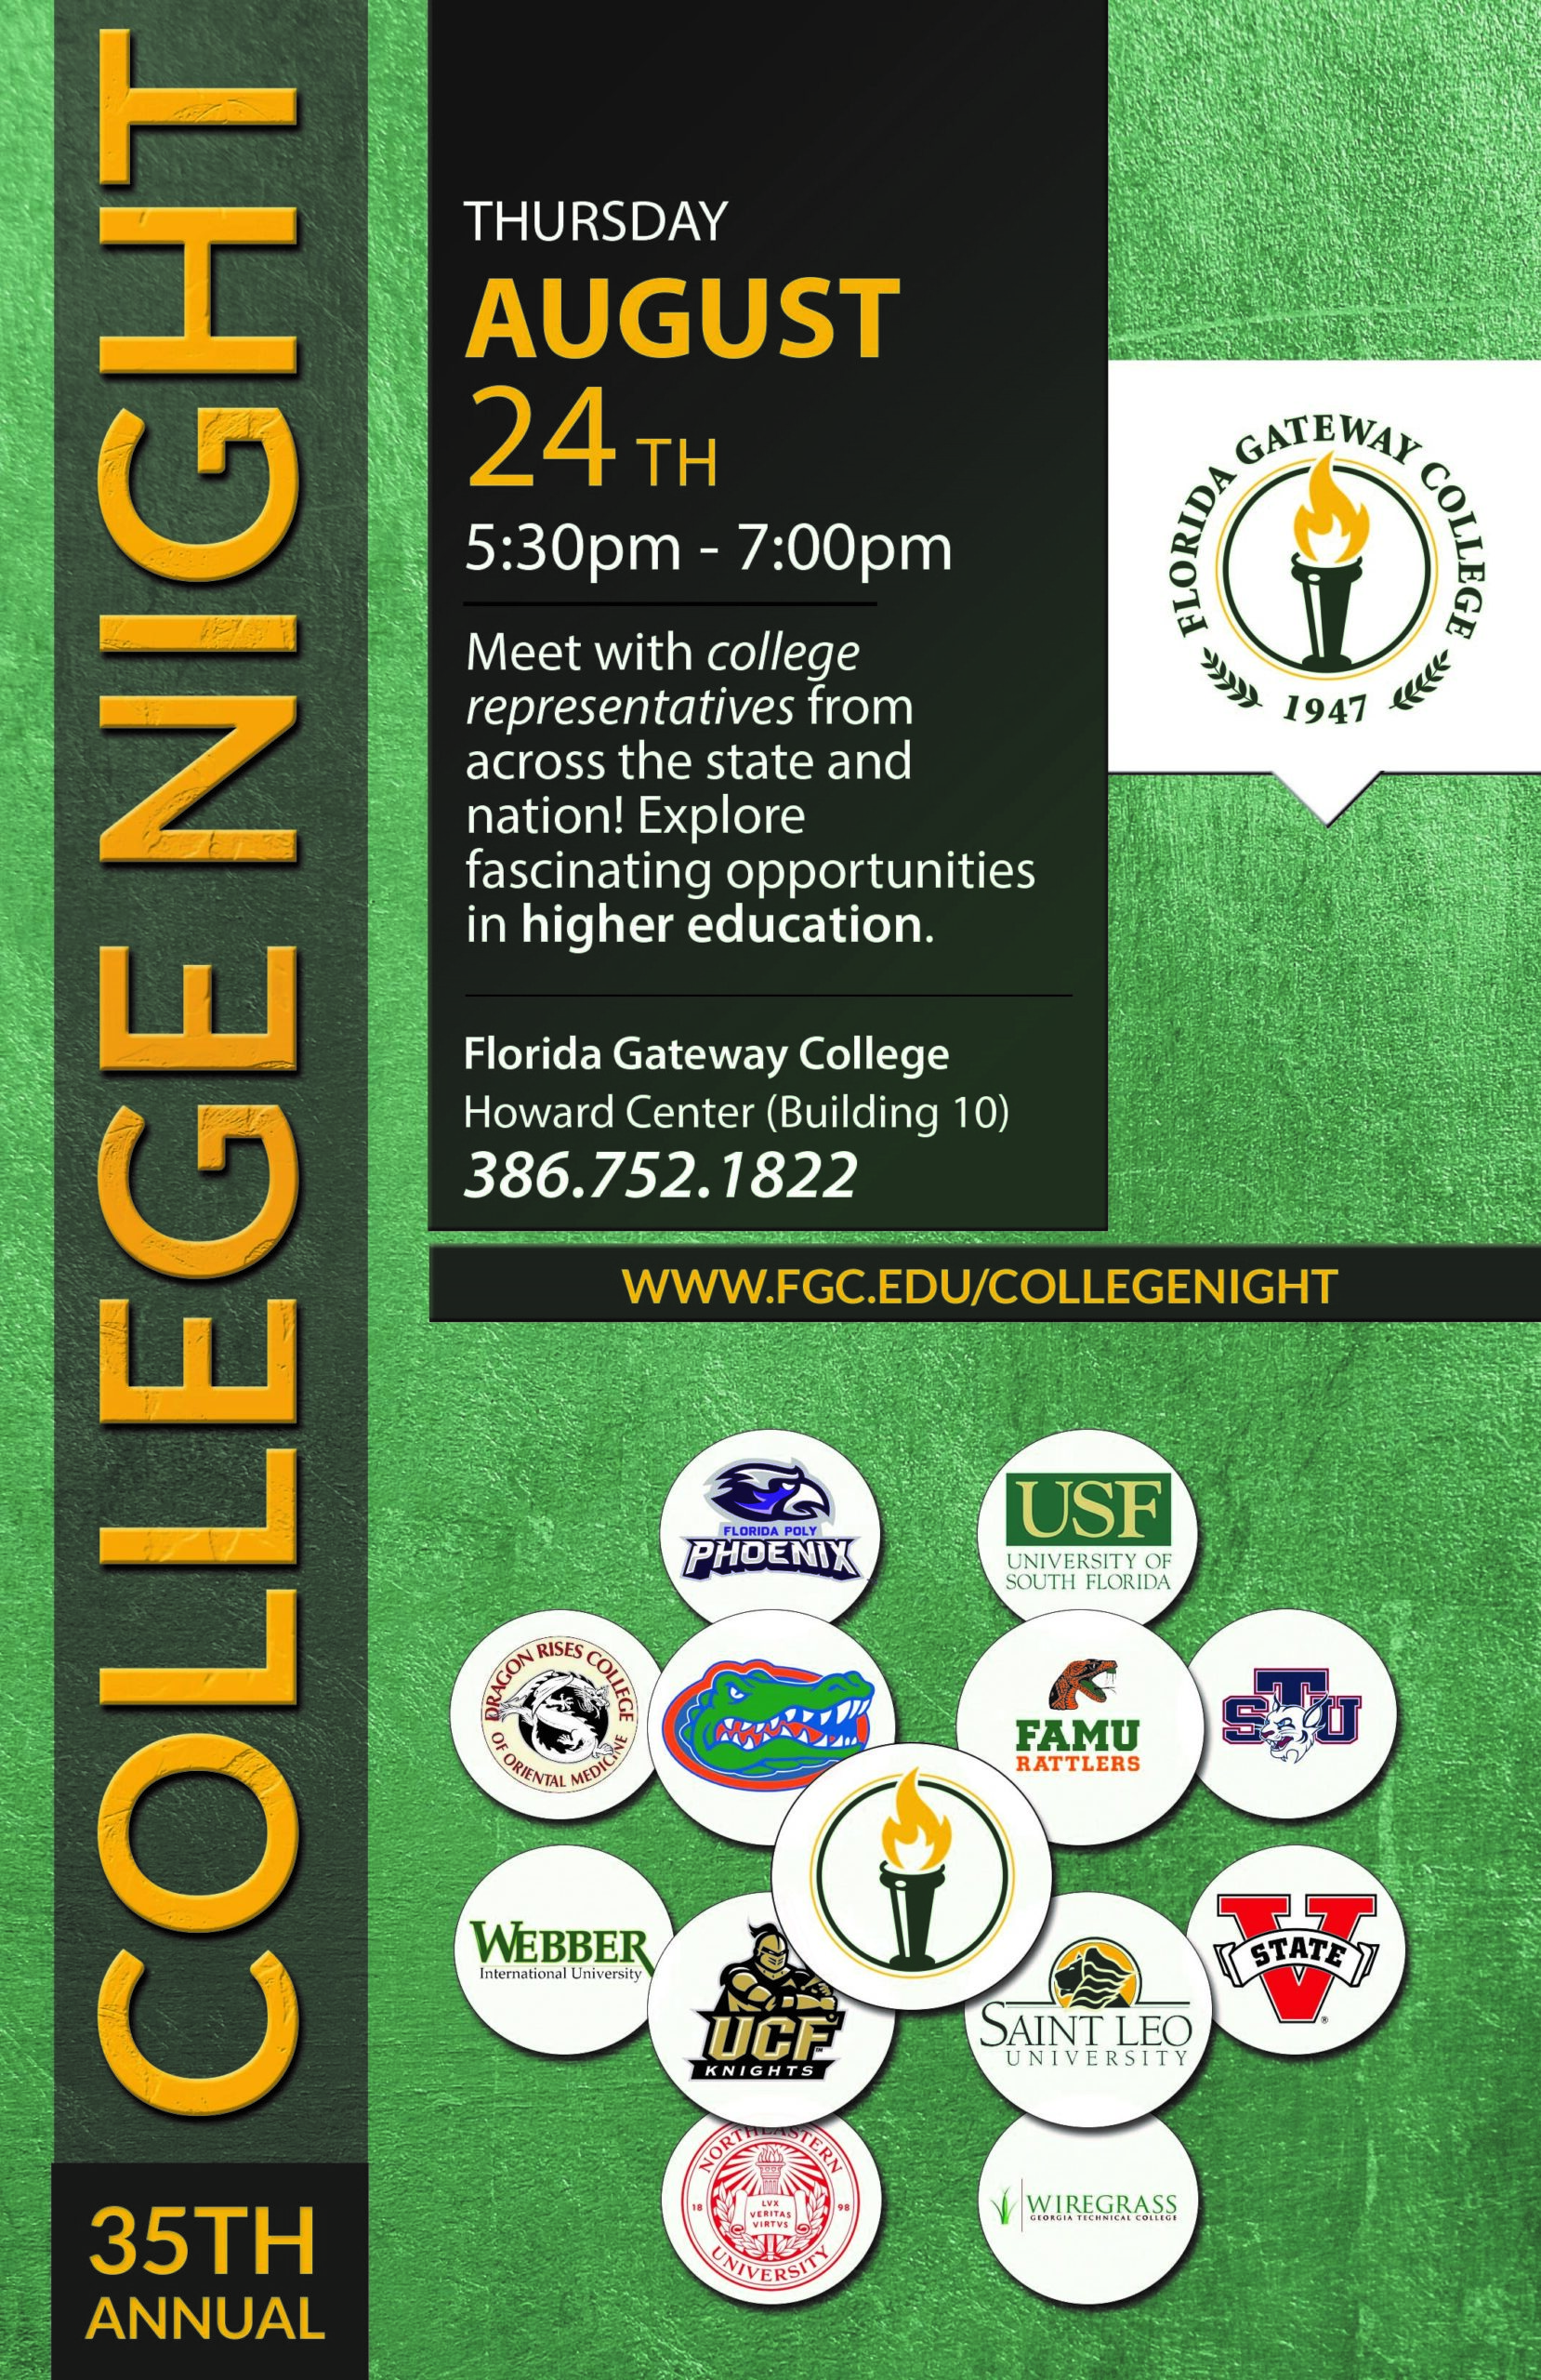 FGC to Hold 35th Annual College Night